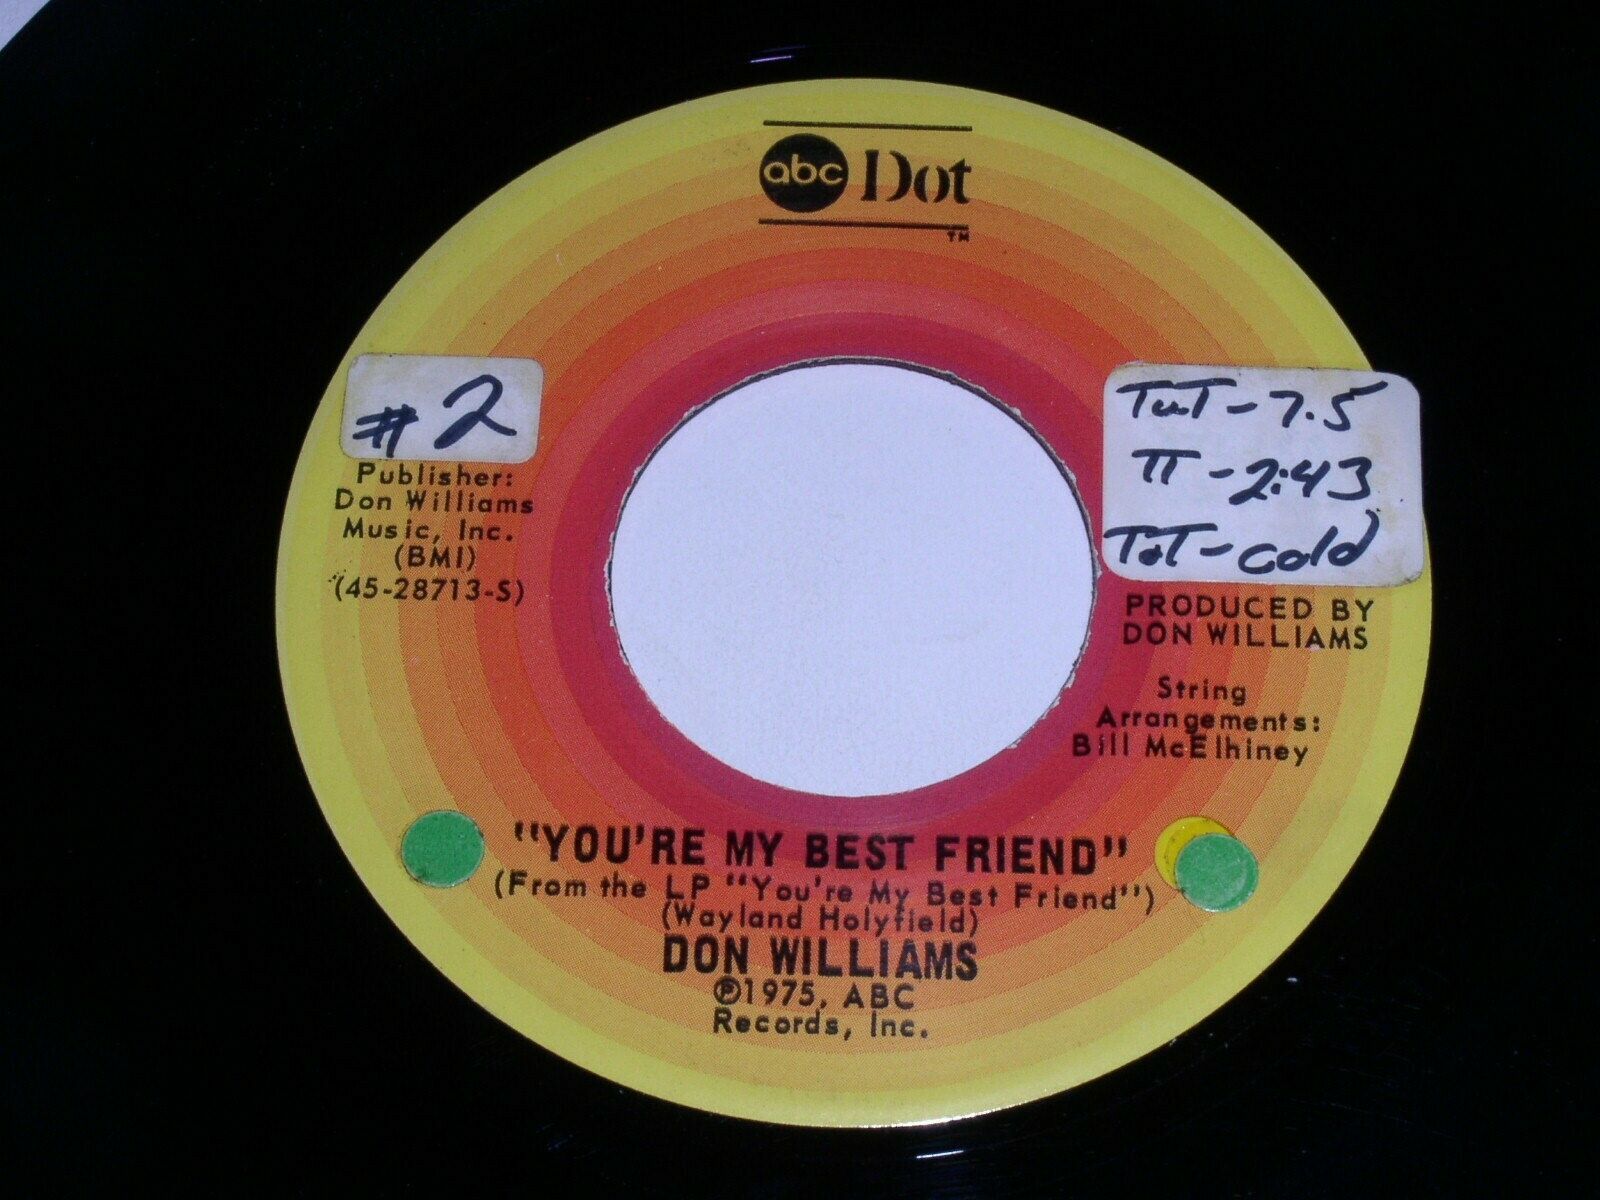 Primary image for Don Williams You're My Best Friend Where You Are 45 Rpm Record ABC Dot Label